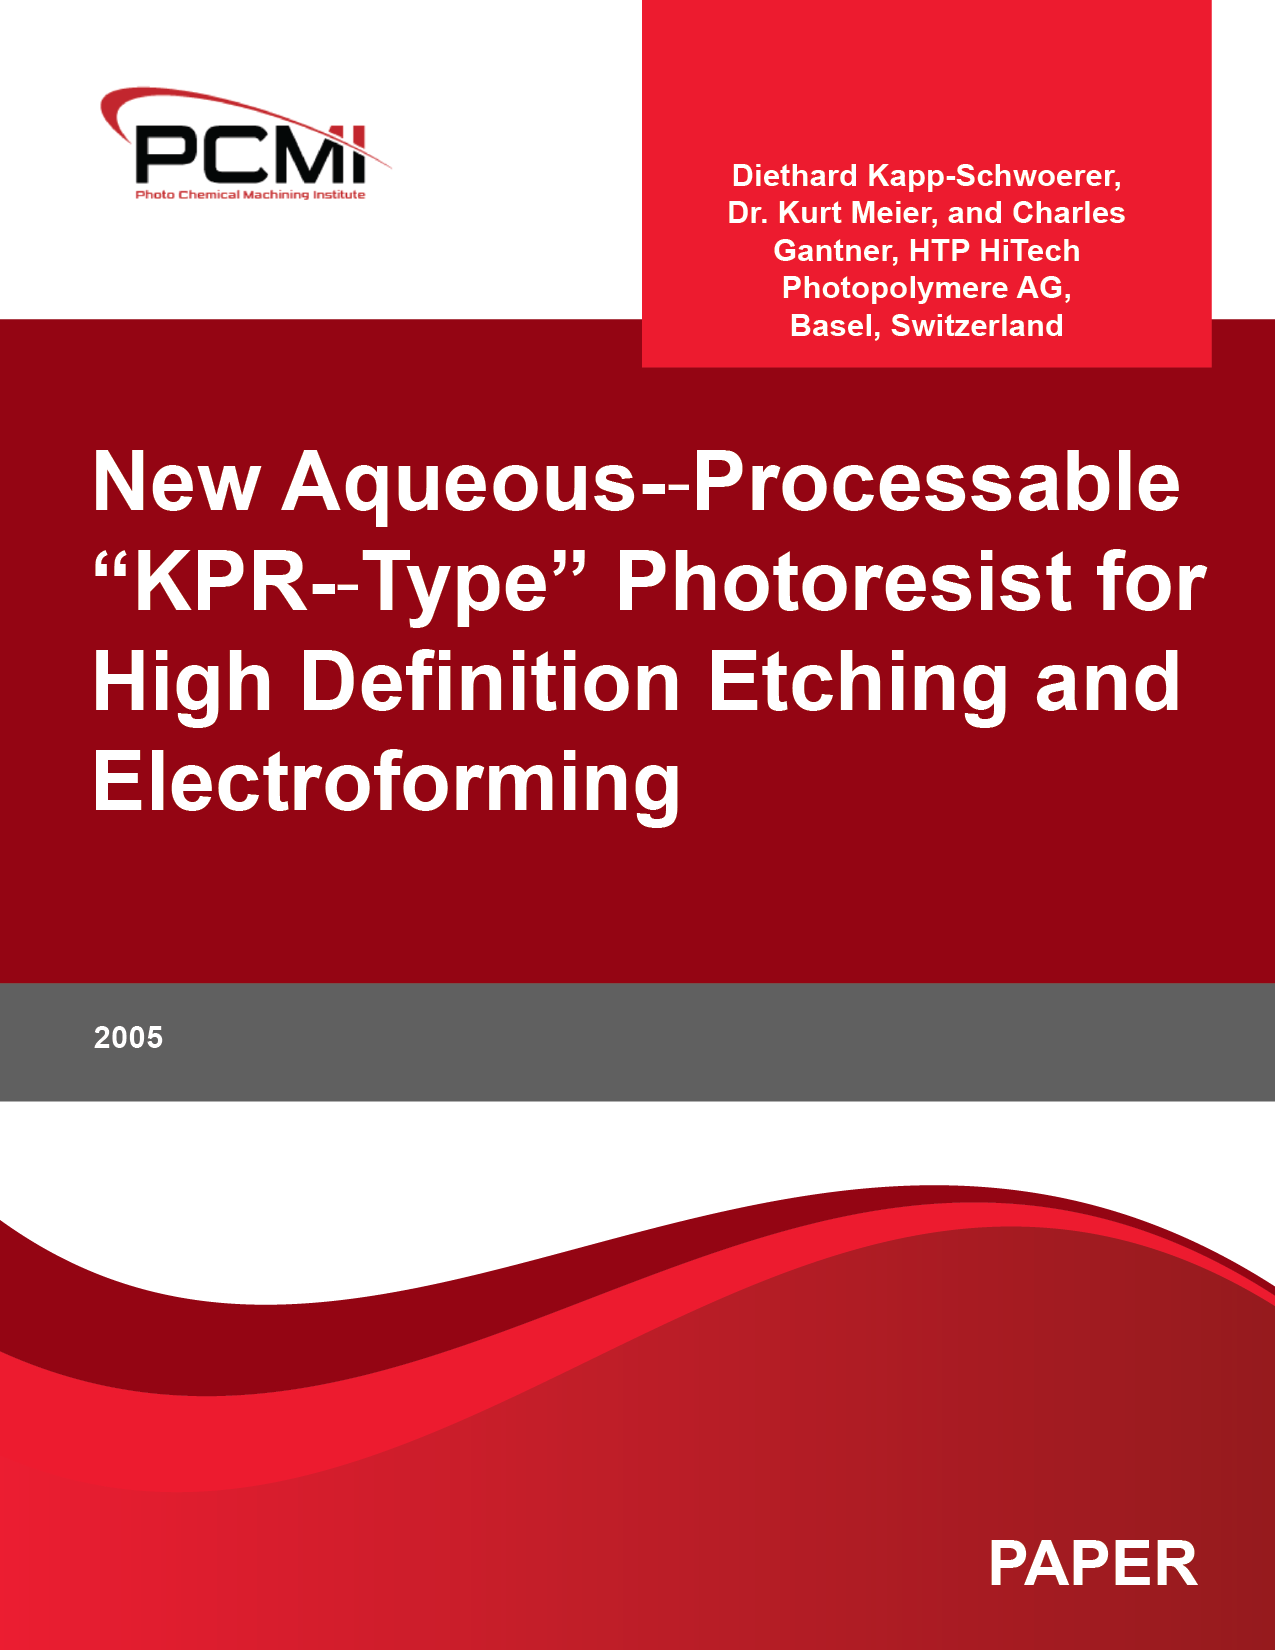 New Aqueous-­‐Processable “KPR-­‐Type” Photoresist for High Definition Etching and Electroforming